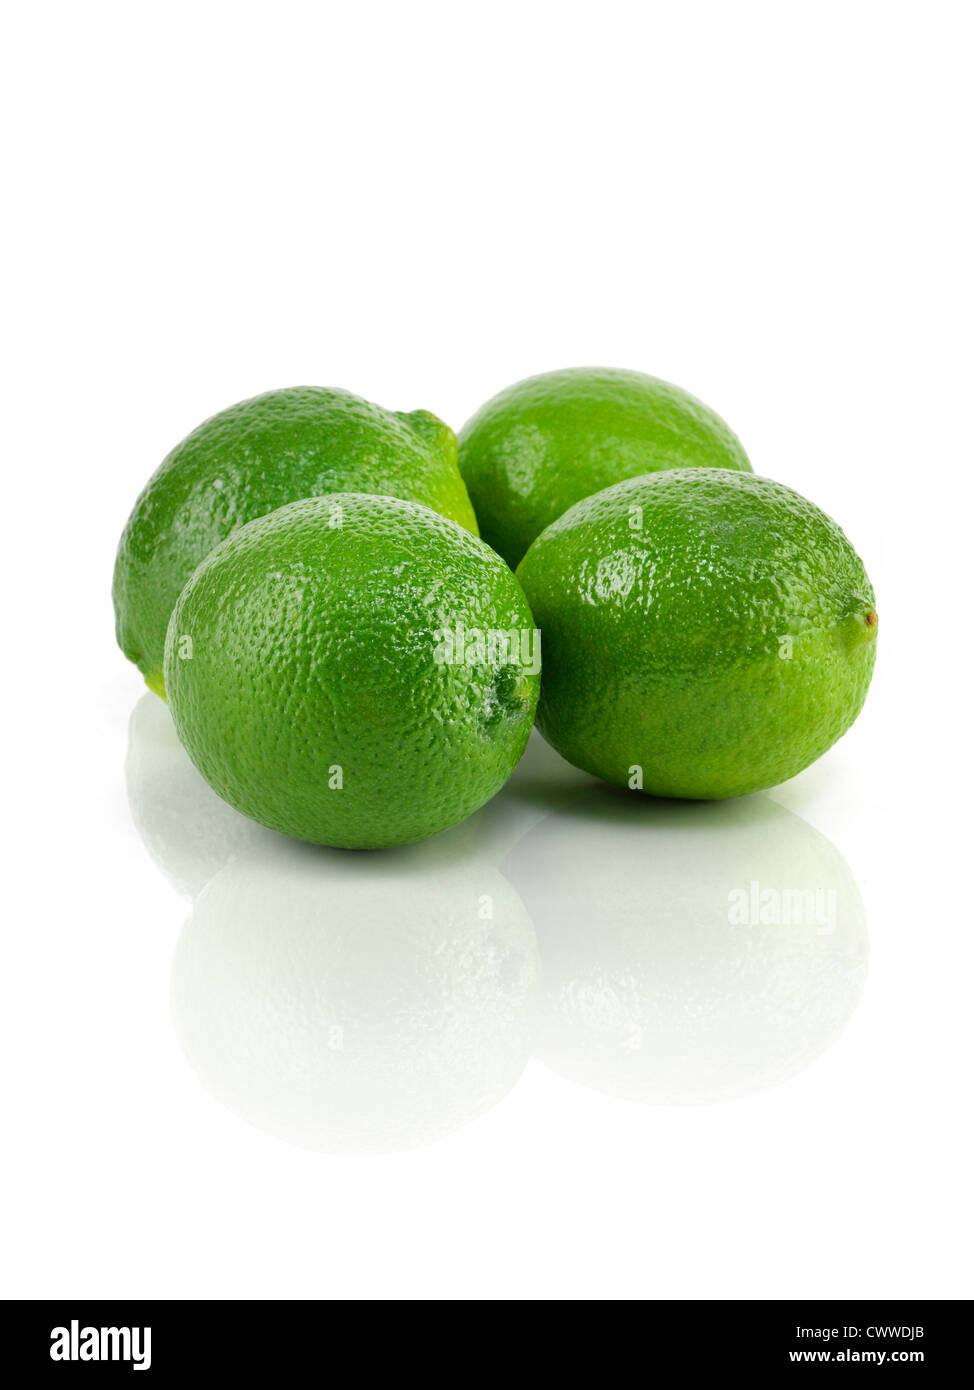 four green limes on reflective table Stock Photo